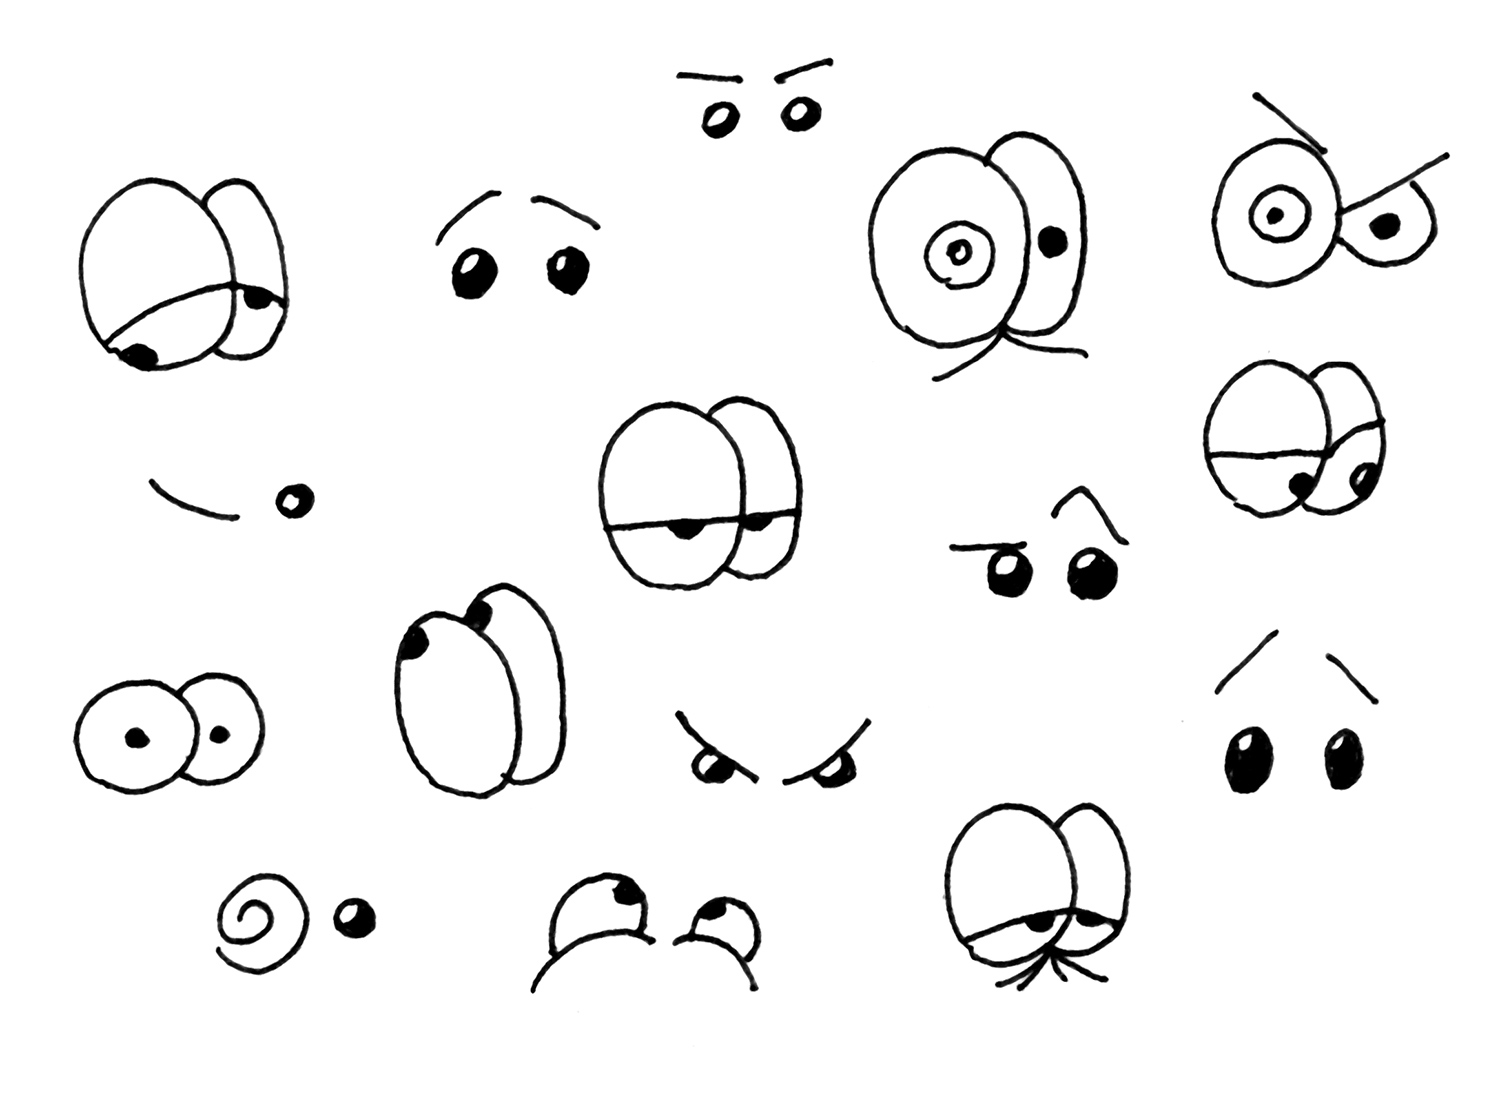 How to Easily Draw Cartoon Eyes to Show Different Emotions